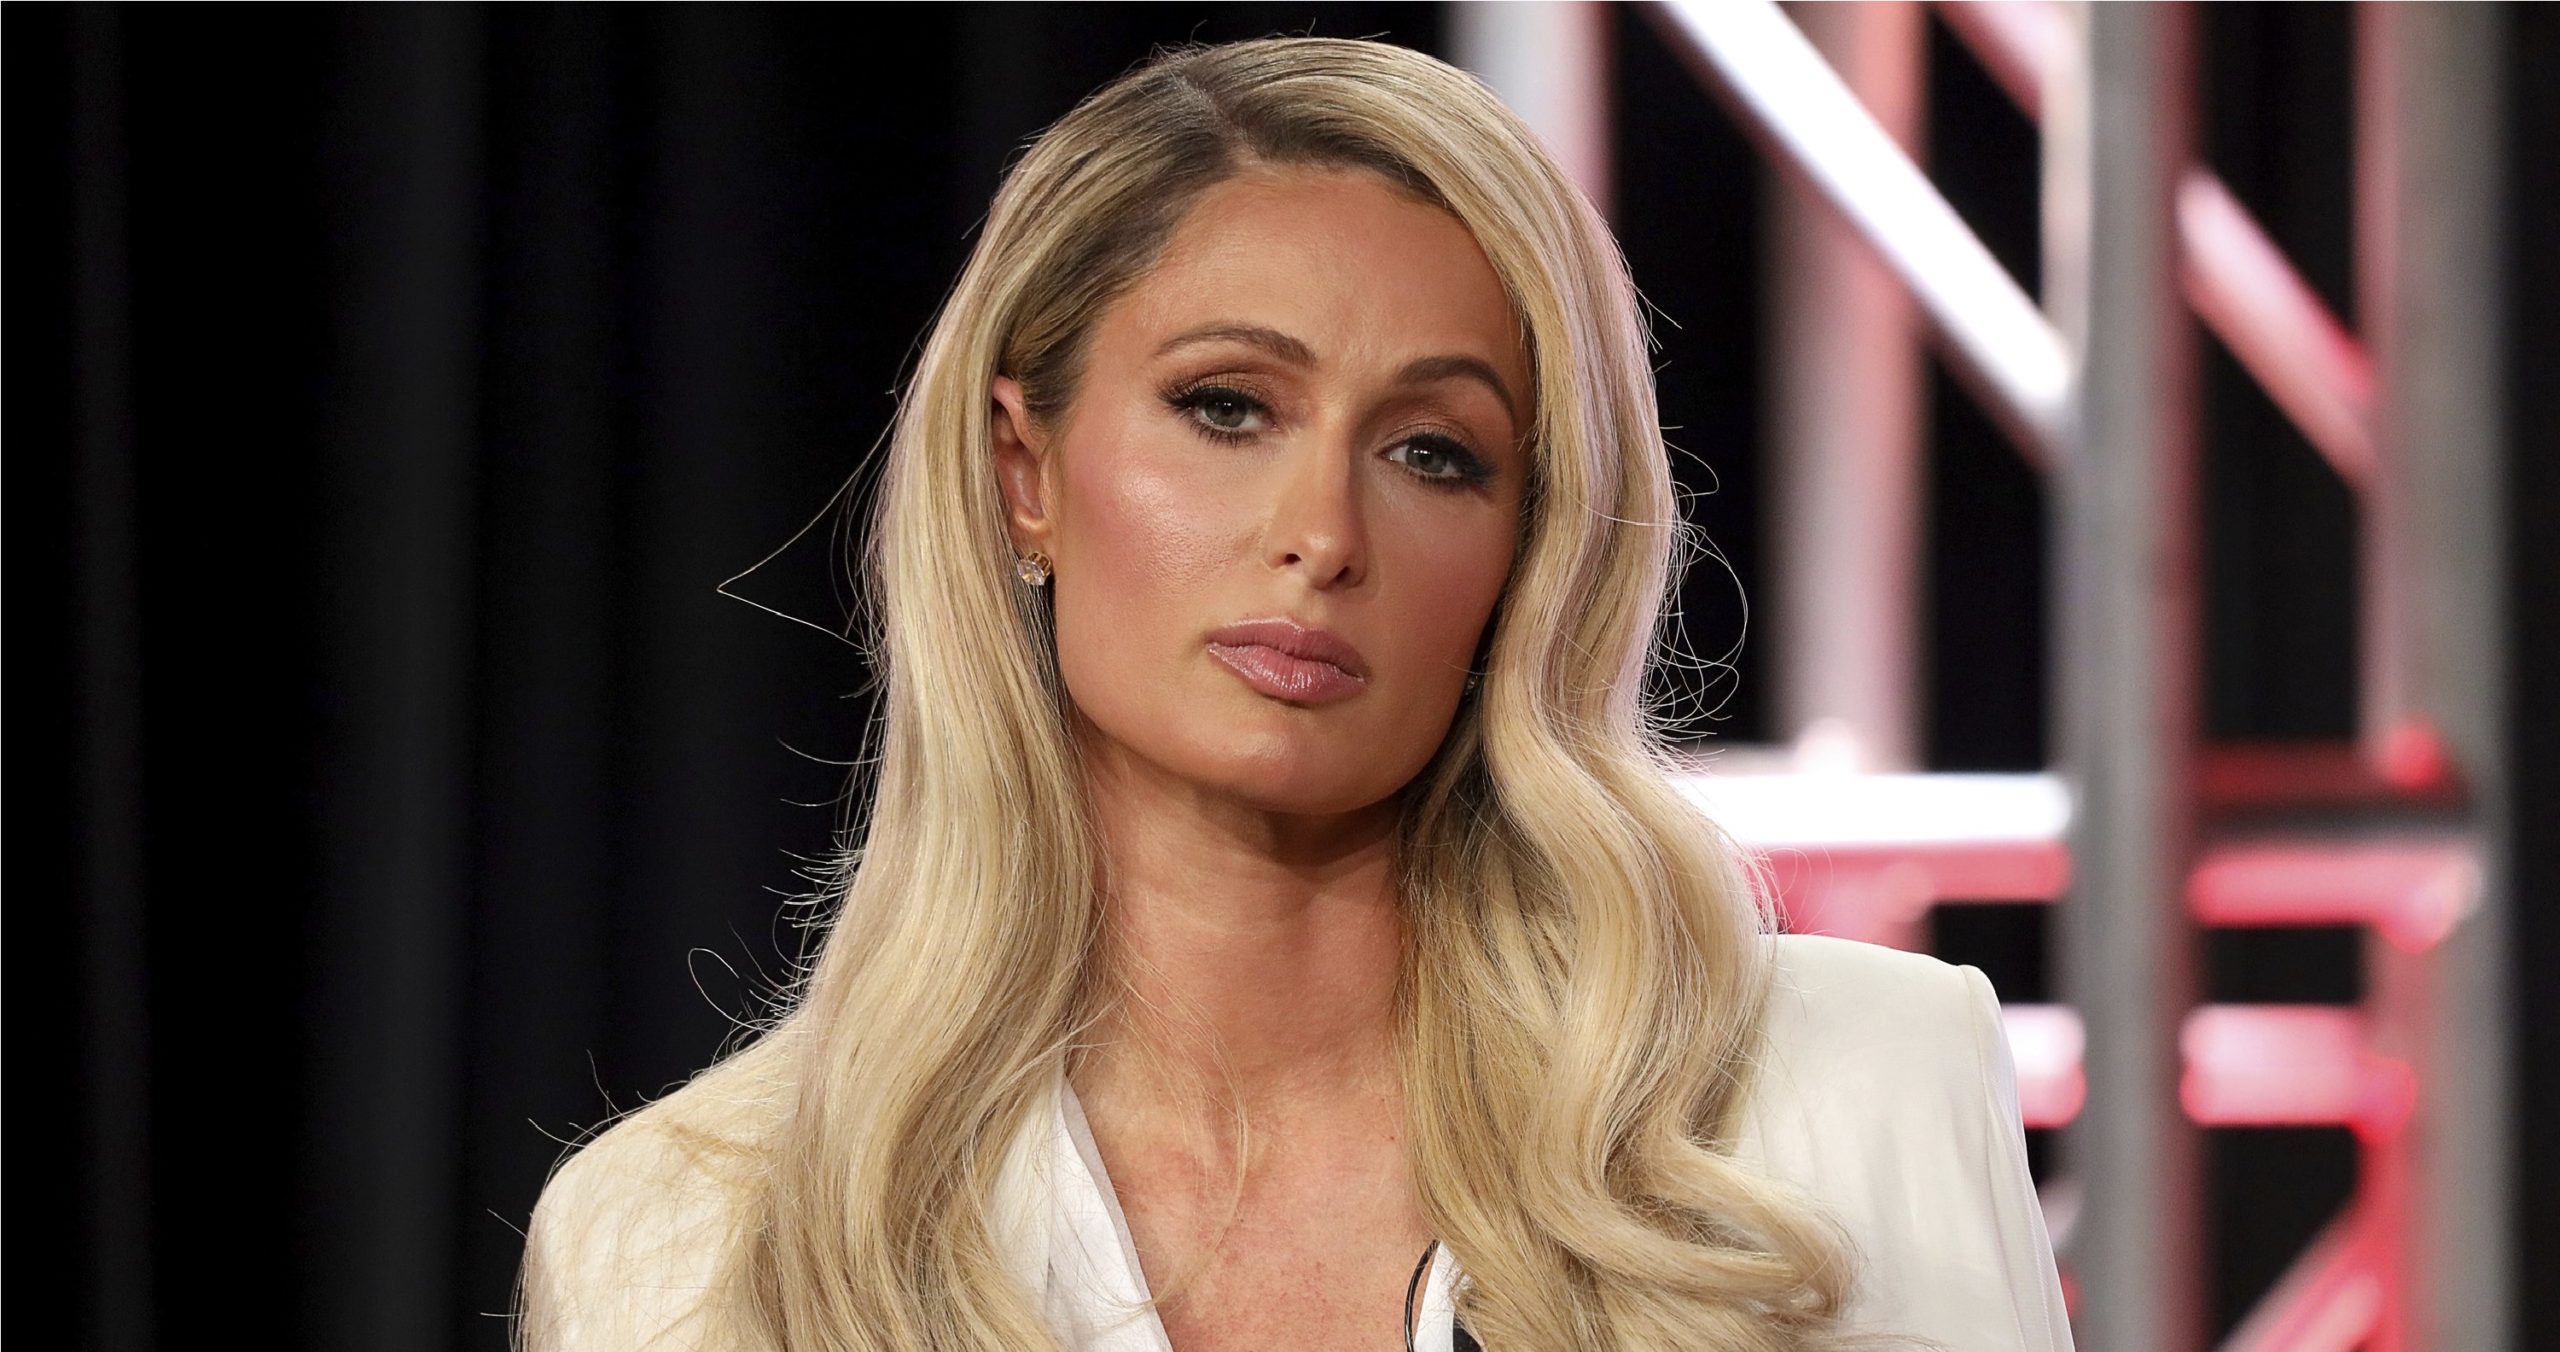 Paris Hilton Reveals She Was Abused As a Teen: ‘I Buried My Truth For So Long’